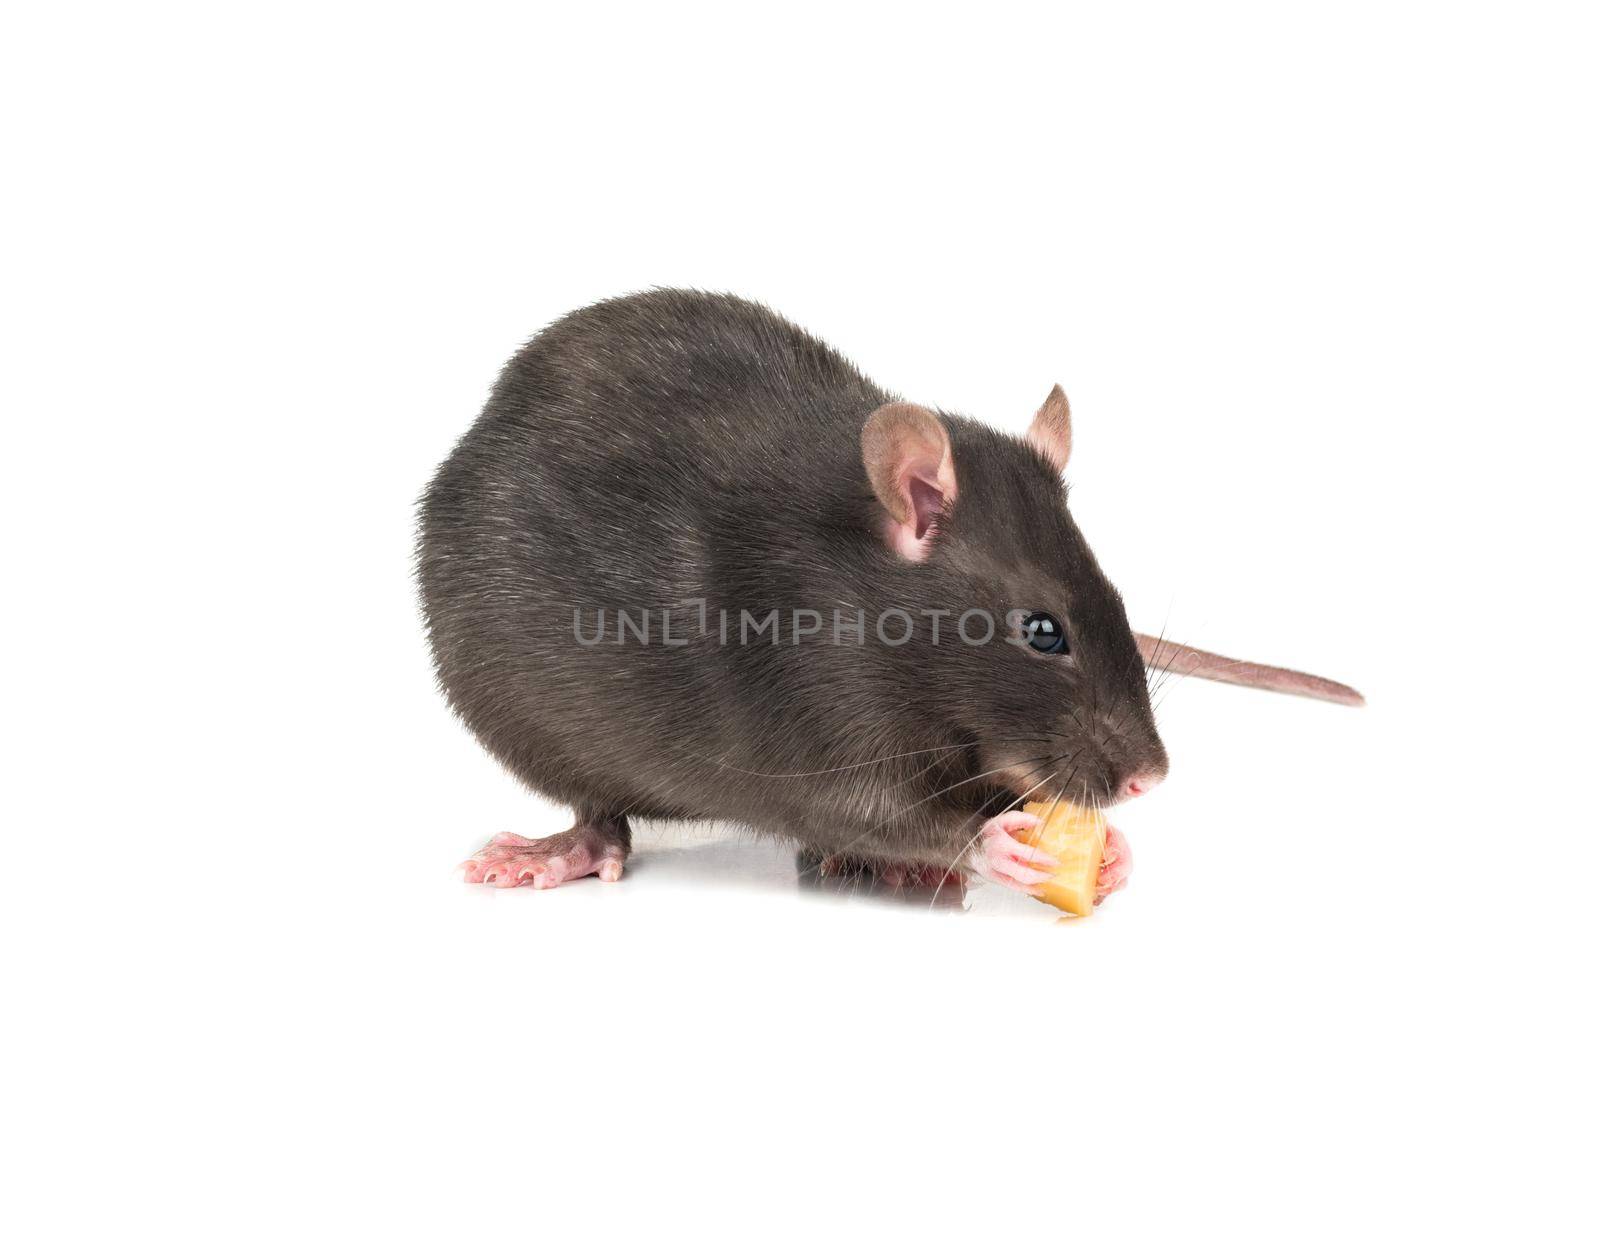 Beautiful gray rat bites a piece of cheese on white background